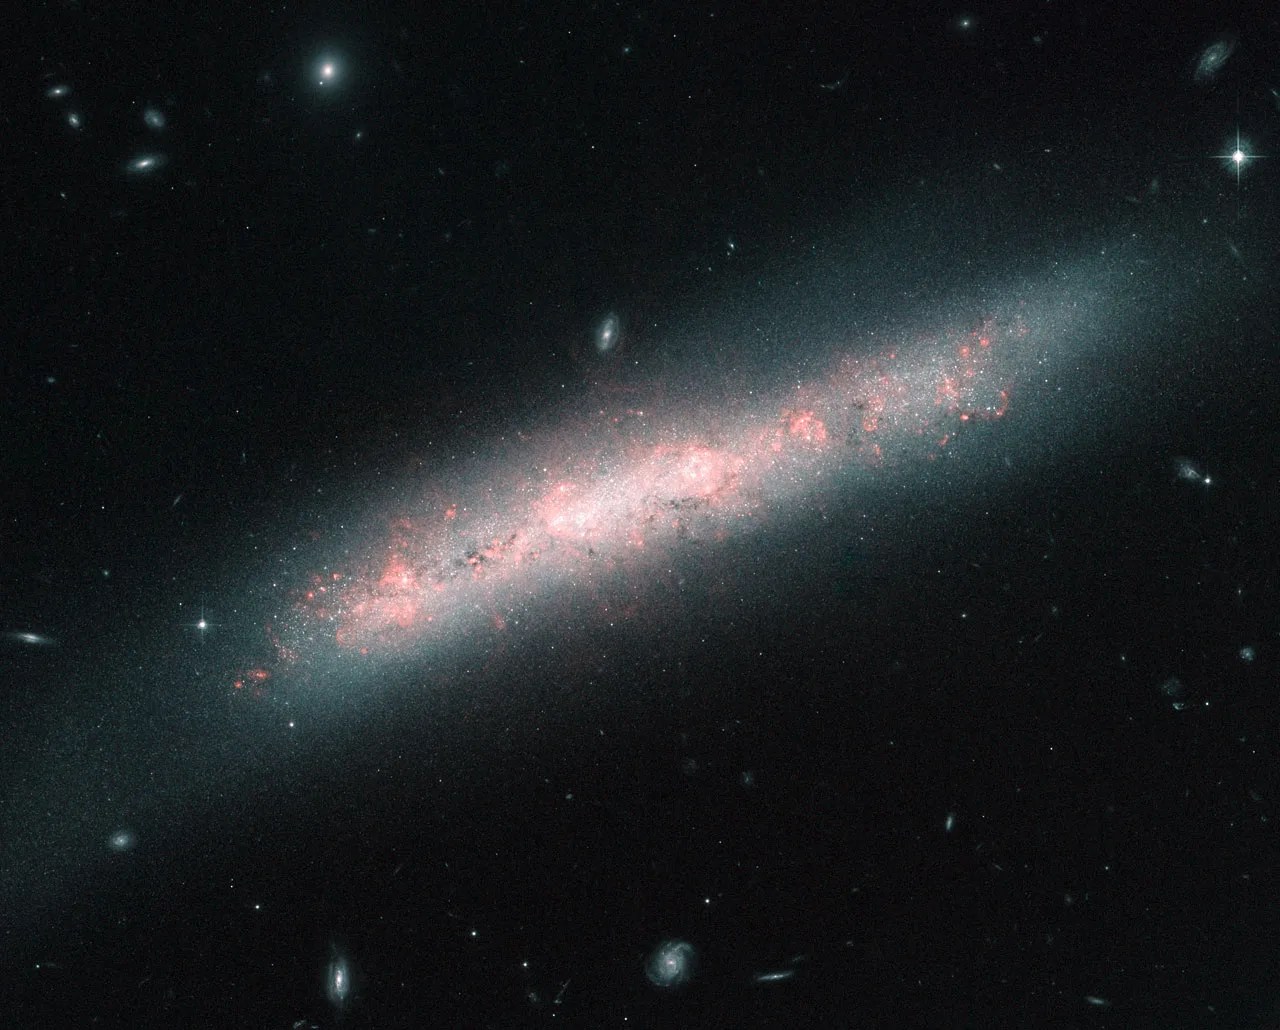 A diffuse edge-on disc galaxy with a heart of hot pink star-forming areas.